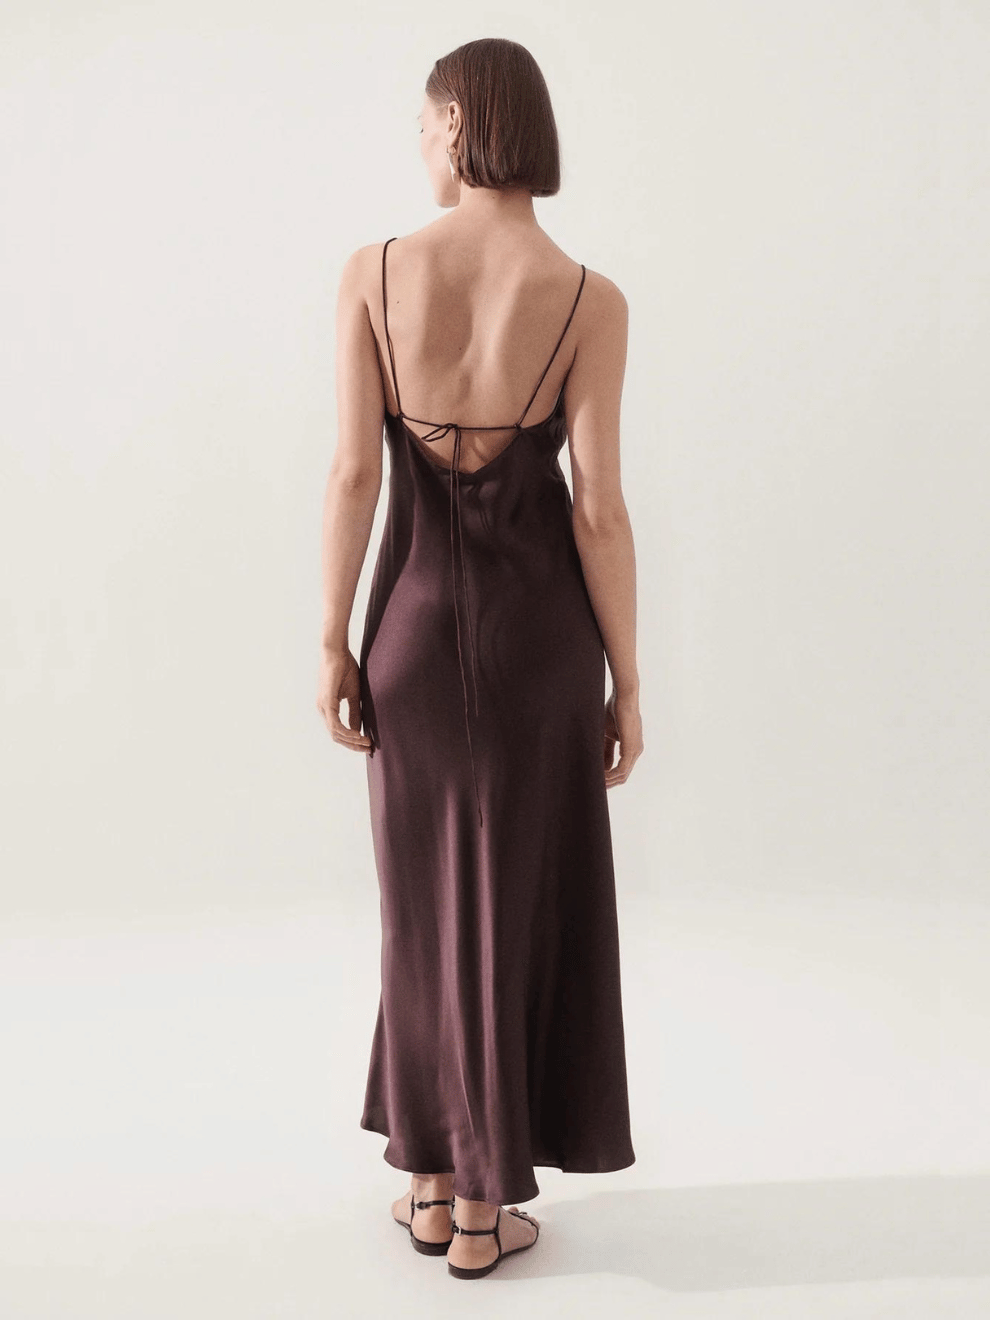 Deco Rouleau Dress in Cacao